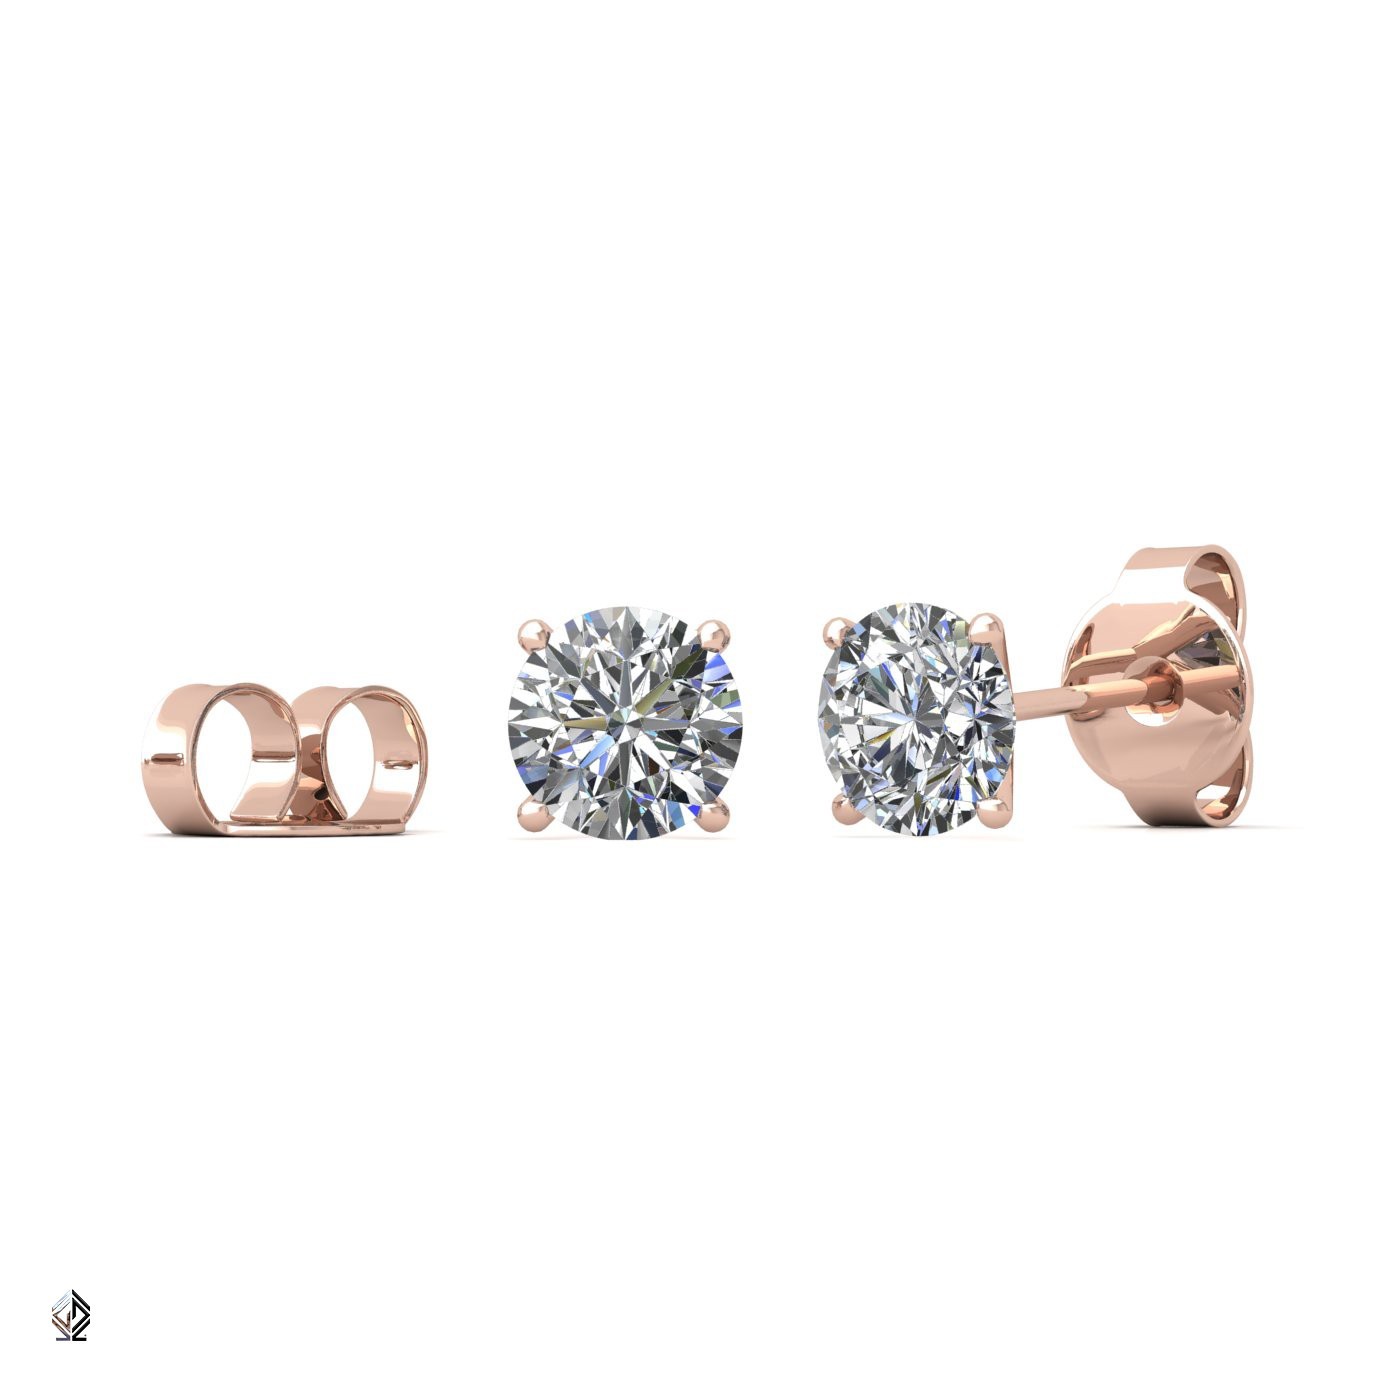 18k rose gold 1.2 ct each (2,4 tcw) 4 prongs round cut classic diamond earring studs Photos & images